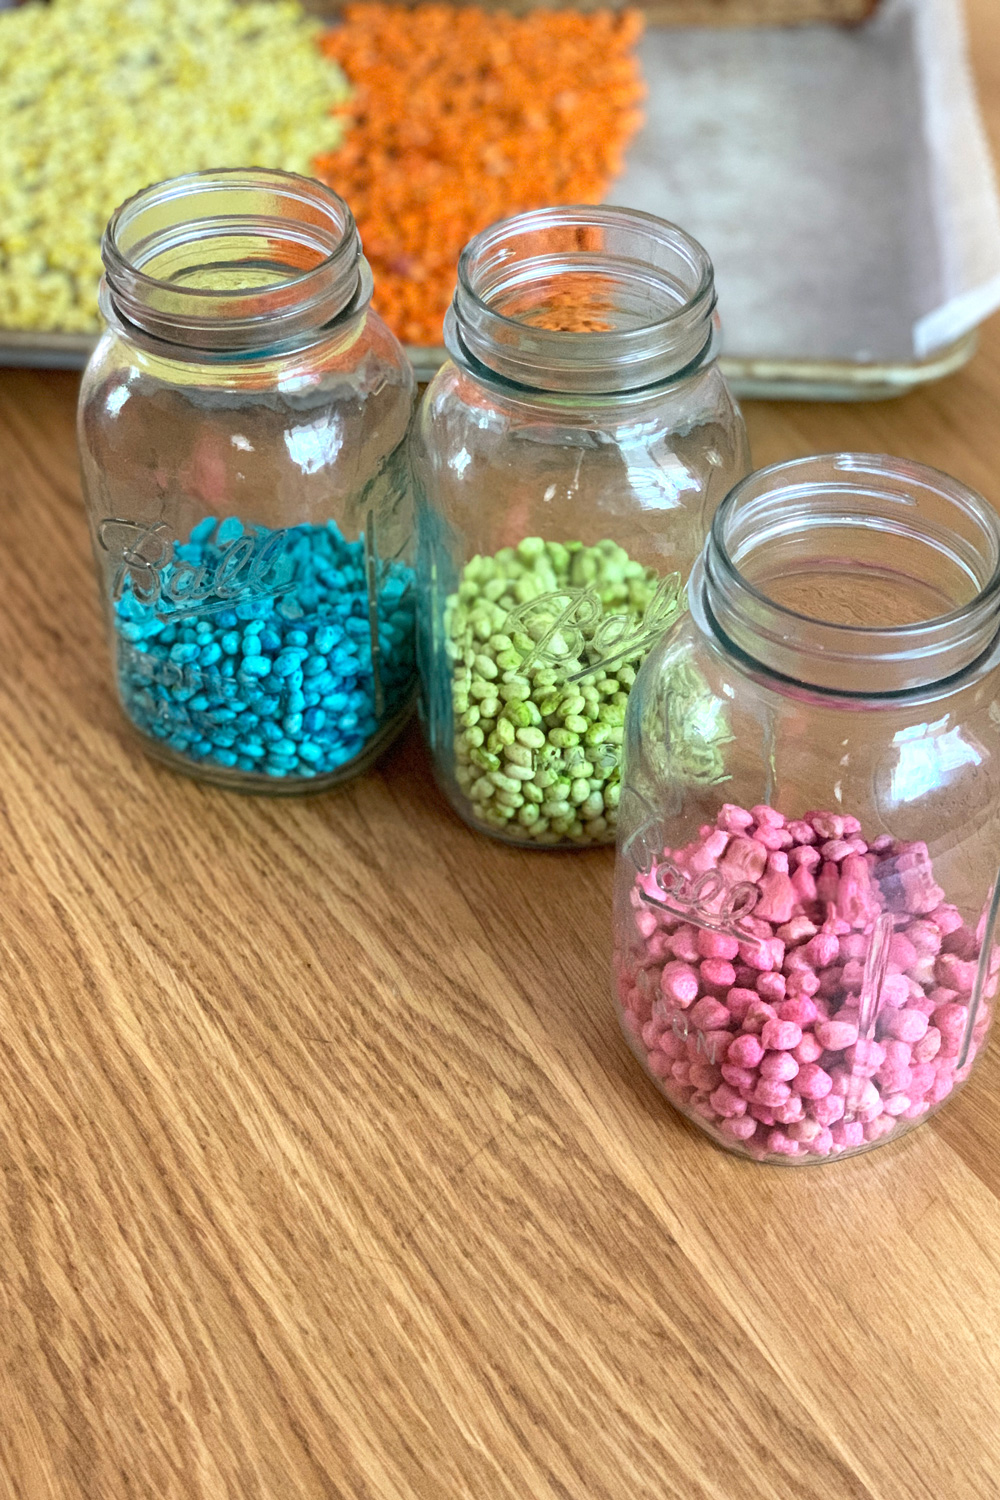 Three jars of beans in blue, green, and pink.